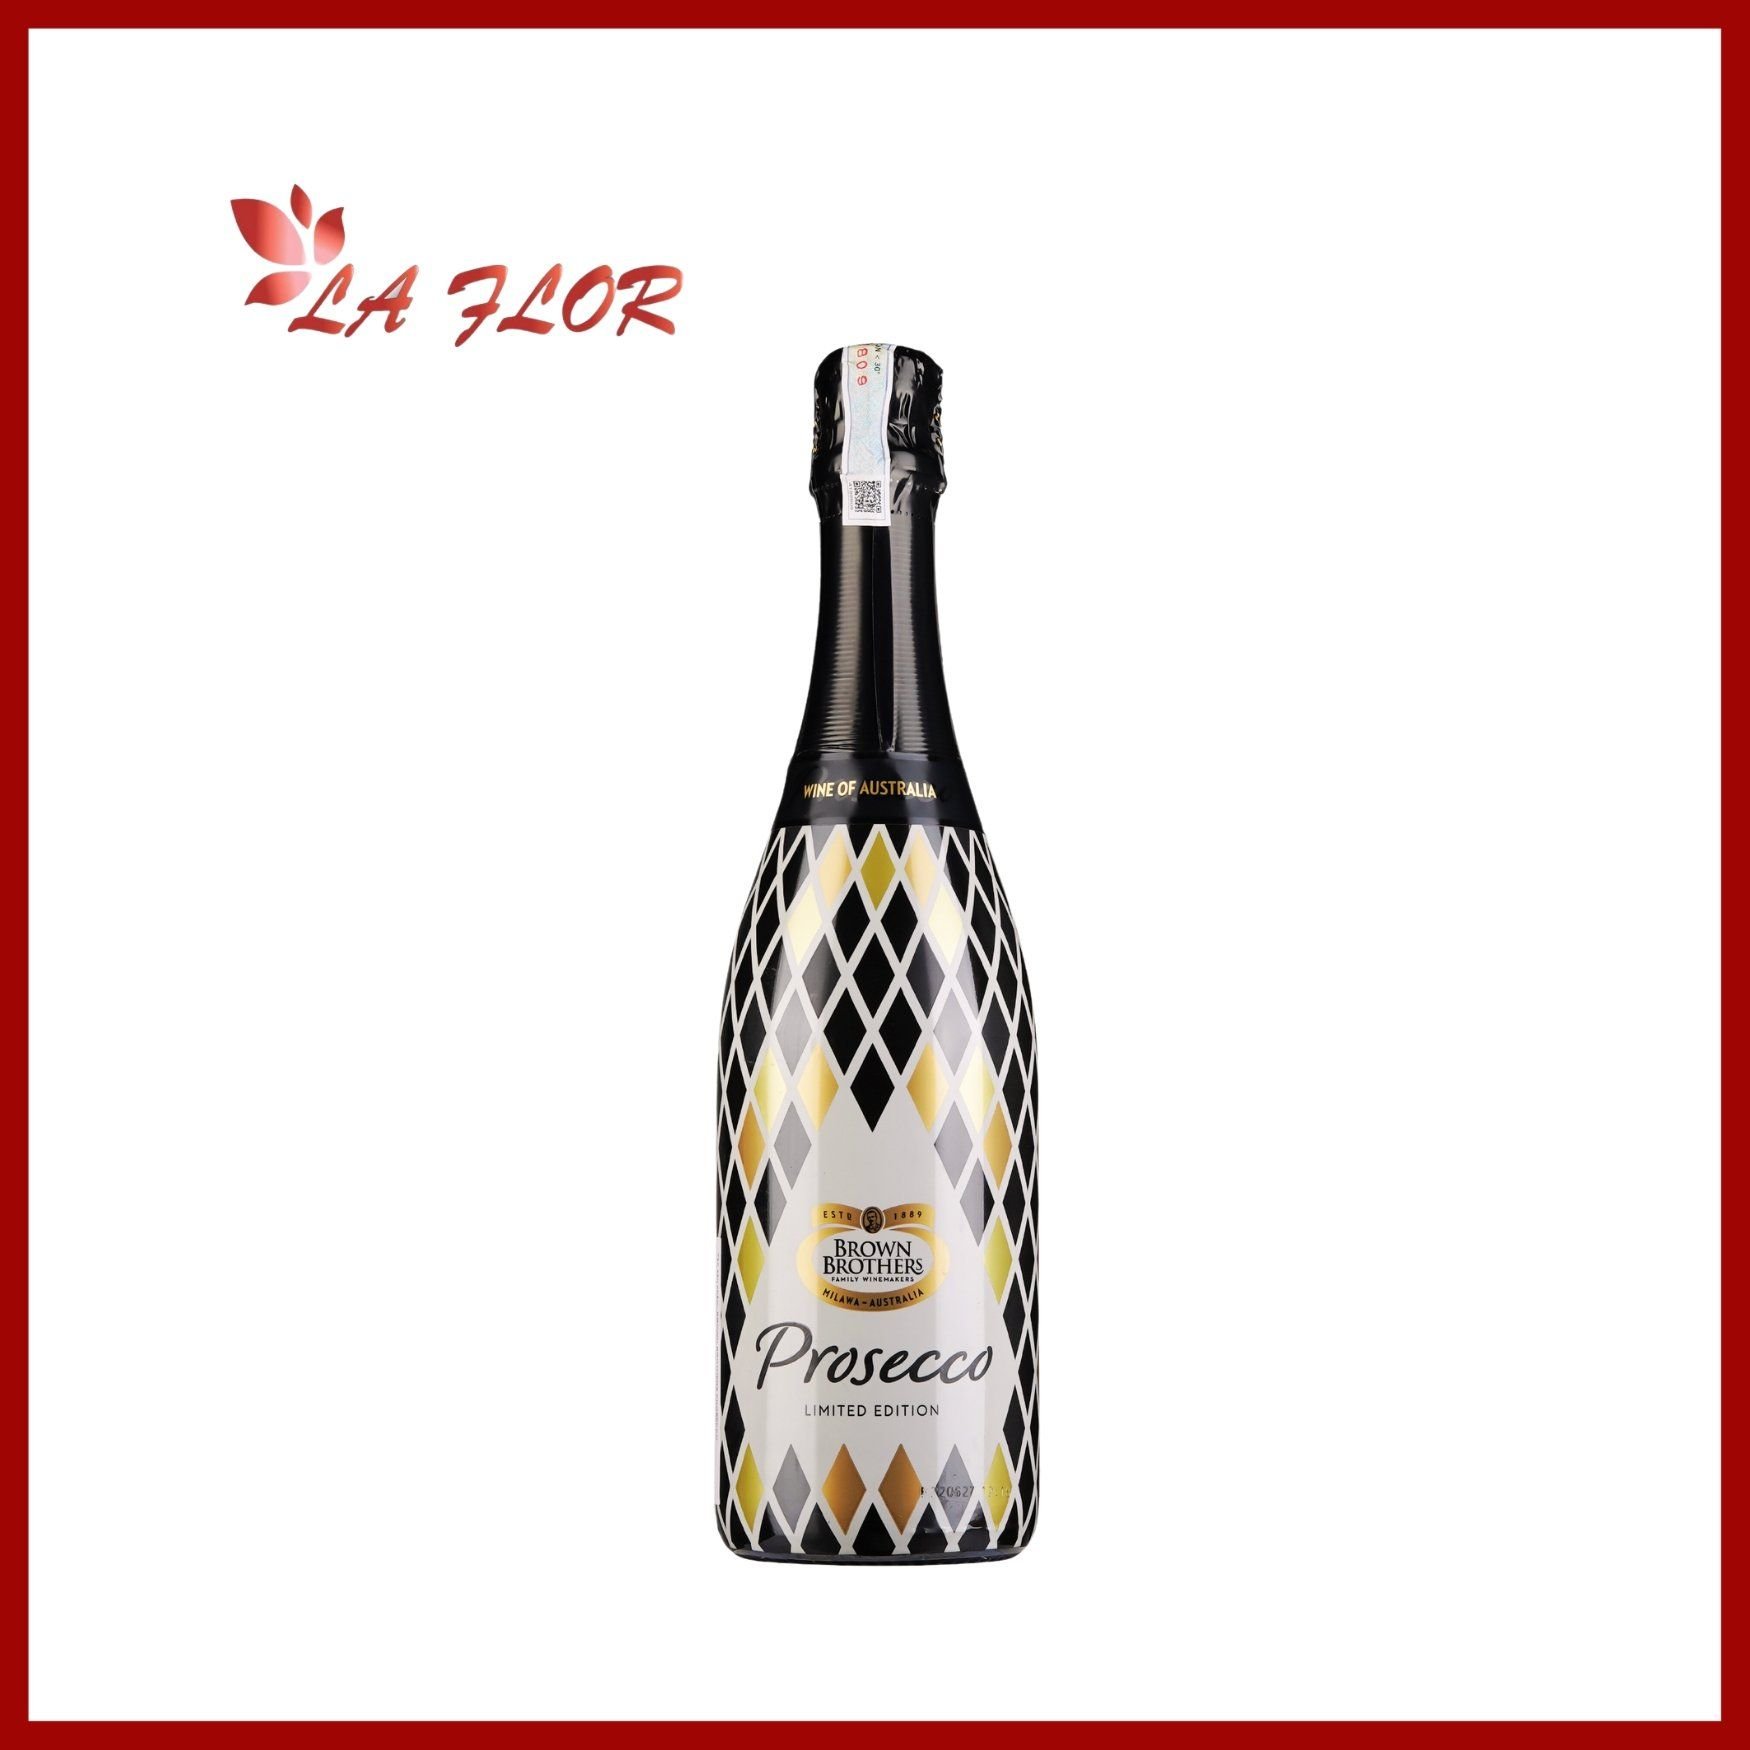  Brown Brothers Prosecco NV ( Limited Edition ) 